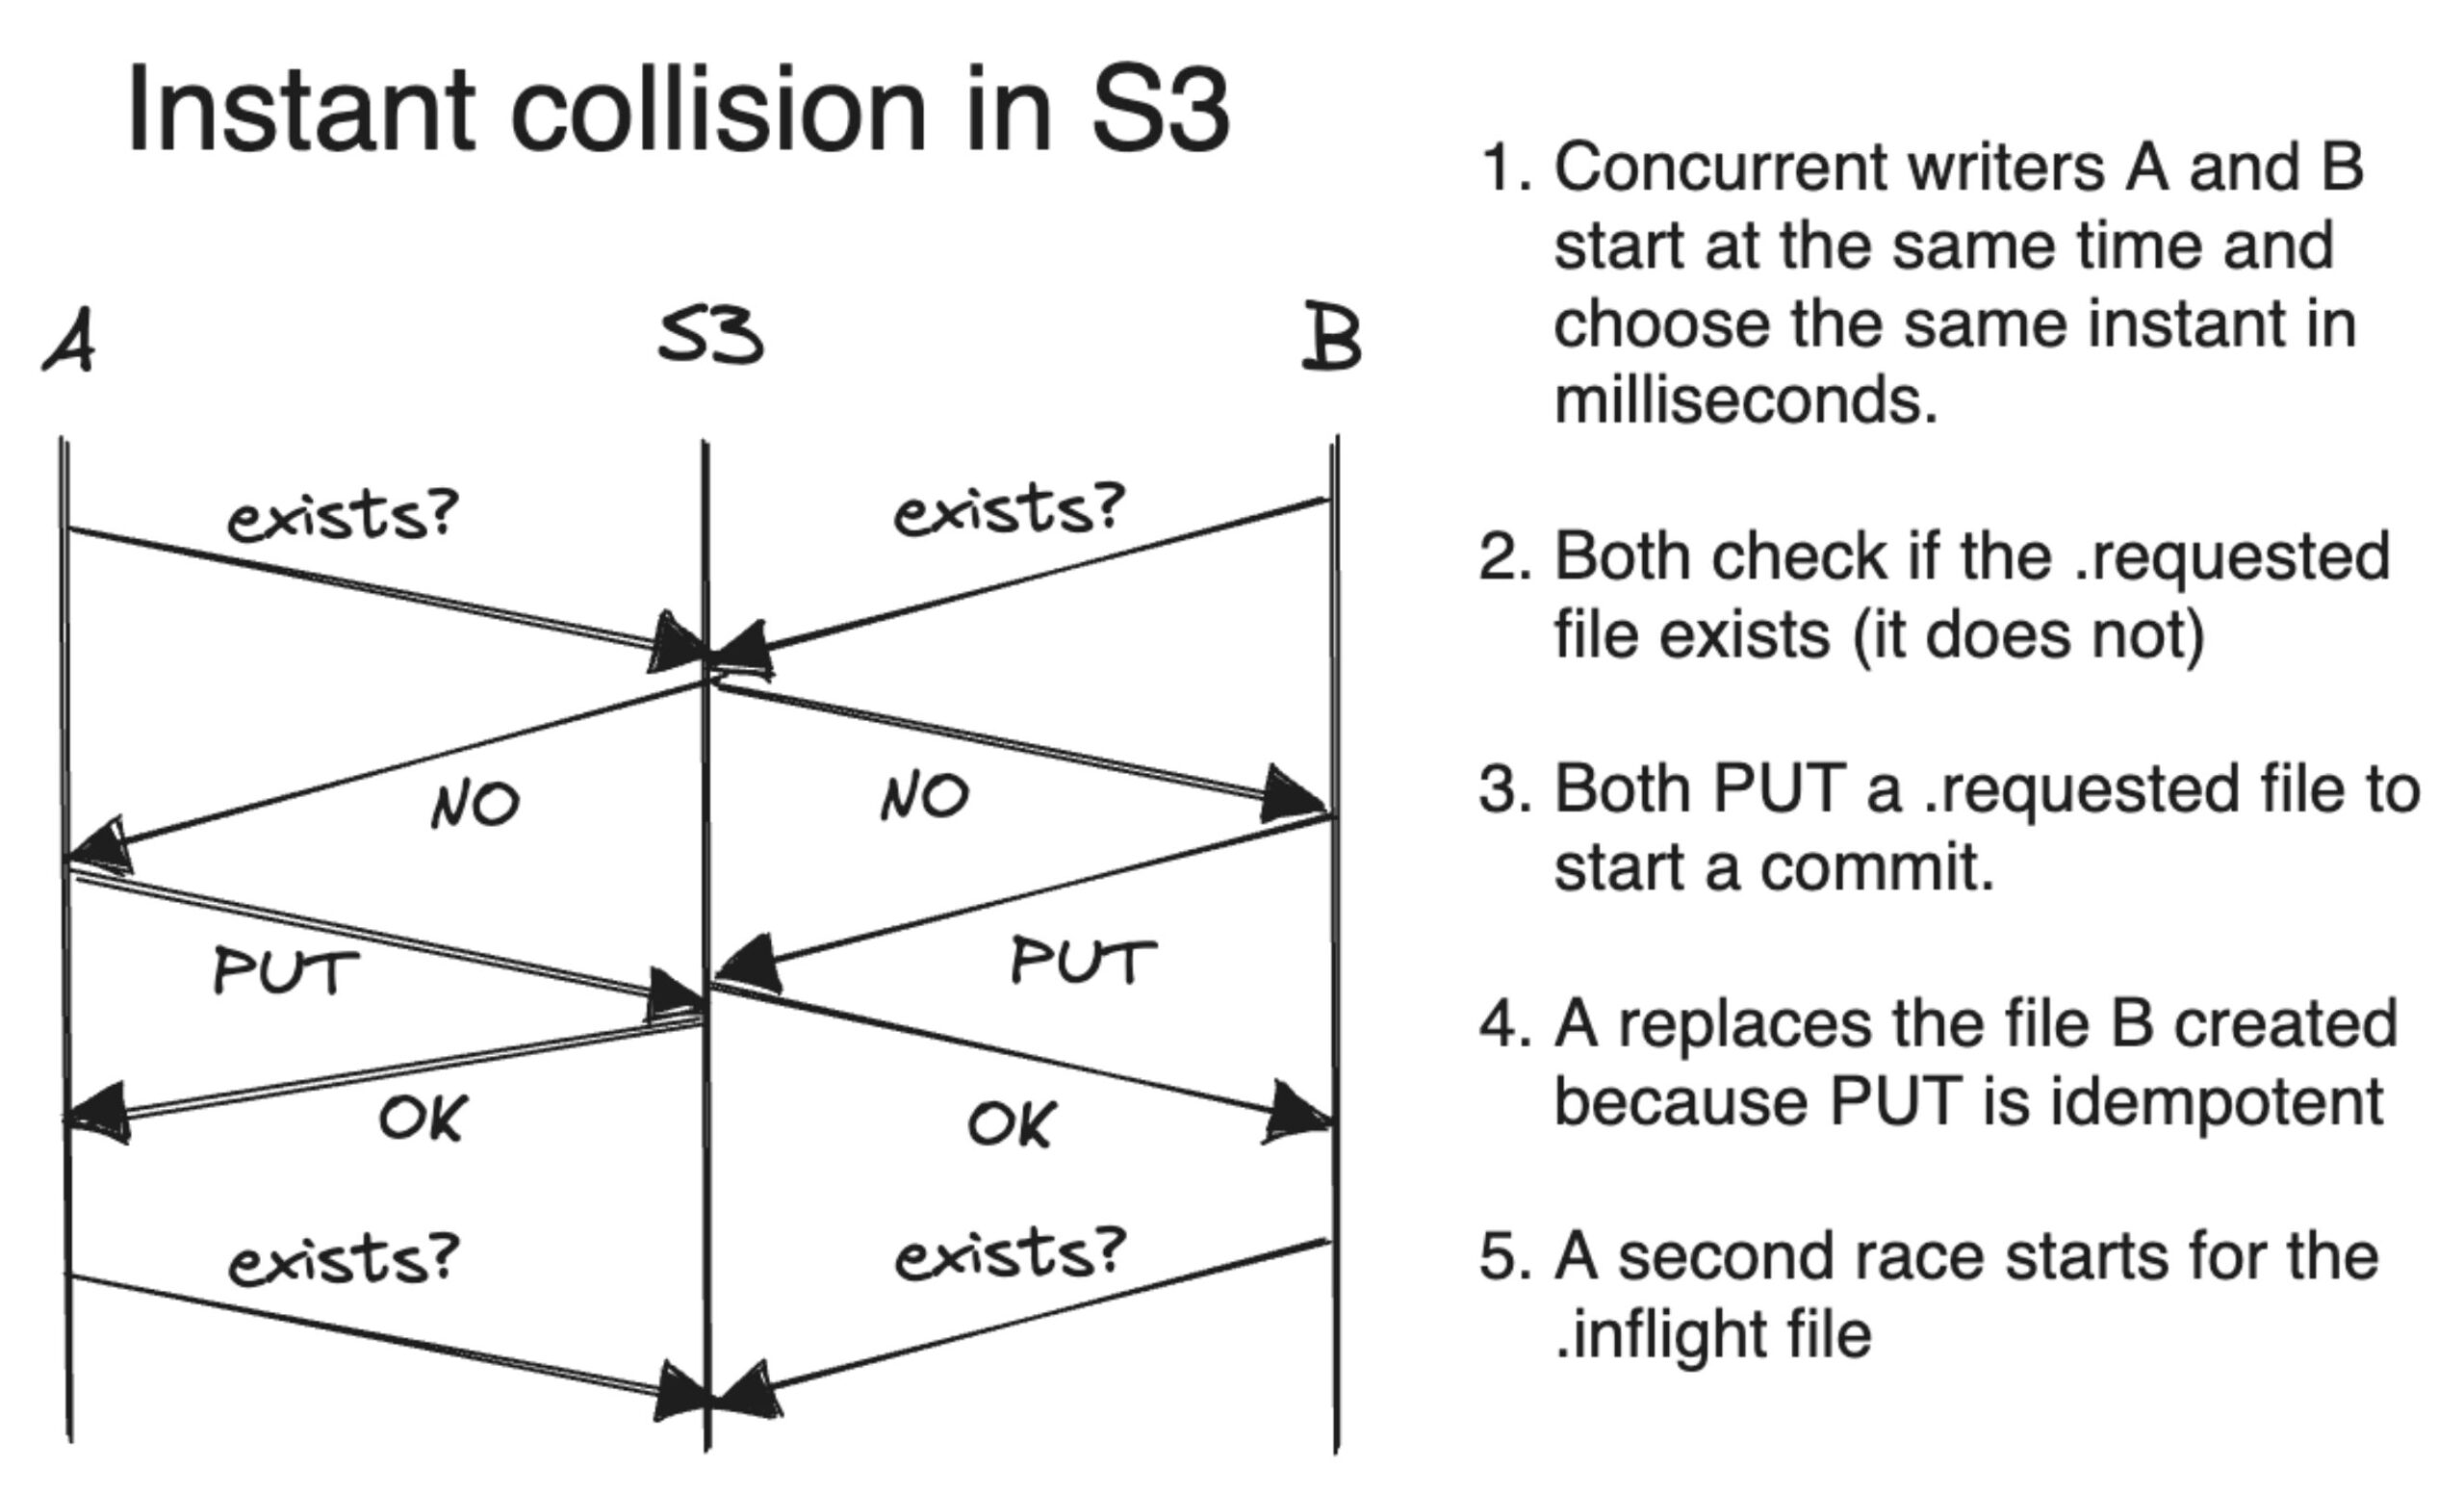 Diagram of instant collision in S3: 1. Concurrent writers A and B start at the same time and choose the same instant in milliseconds.2. Both check if the requested file exists (it does not) 3. Both PUT a requested file to start a commit. 4. A replaces the file B created because PUT is idempotent 5. A second race starts for the inflight file